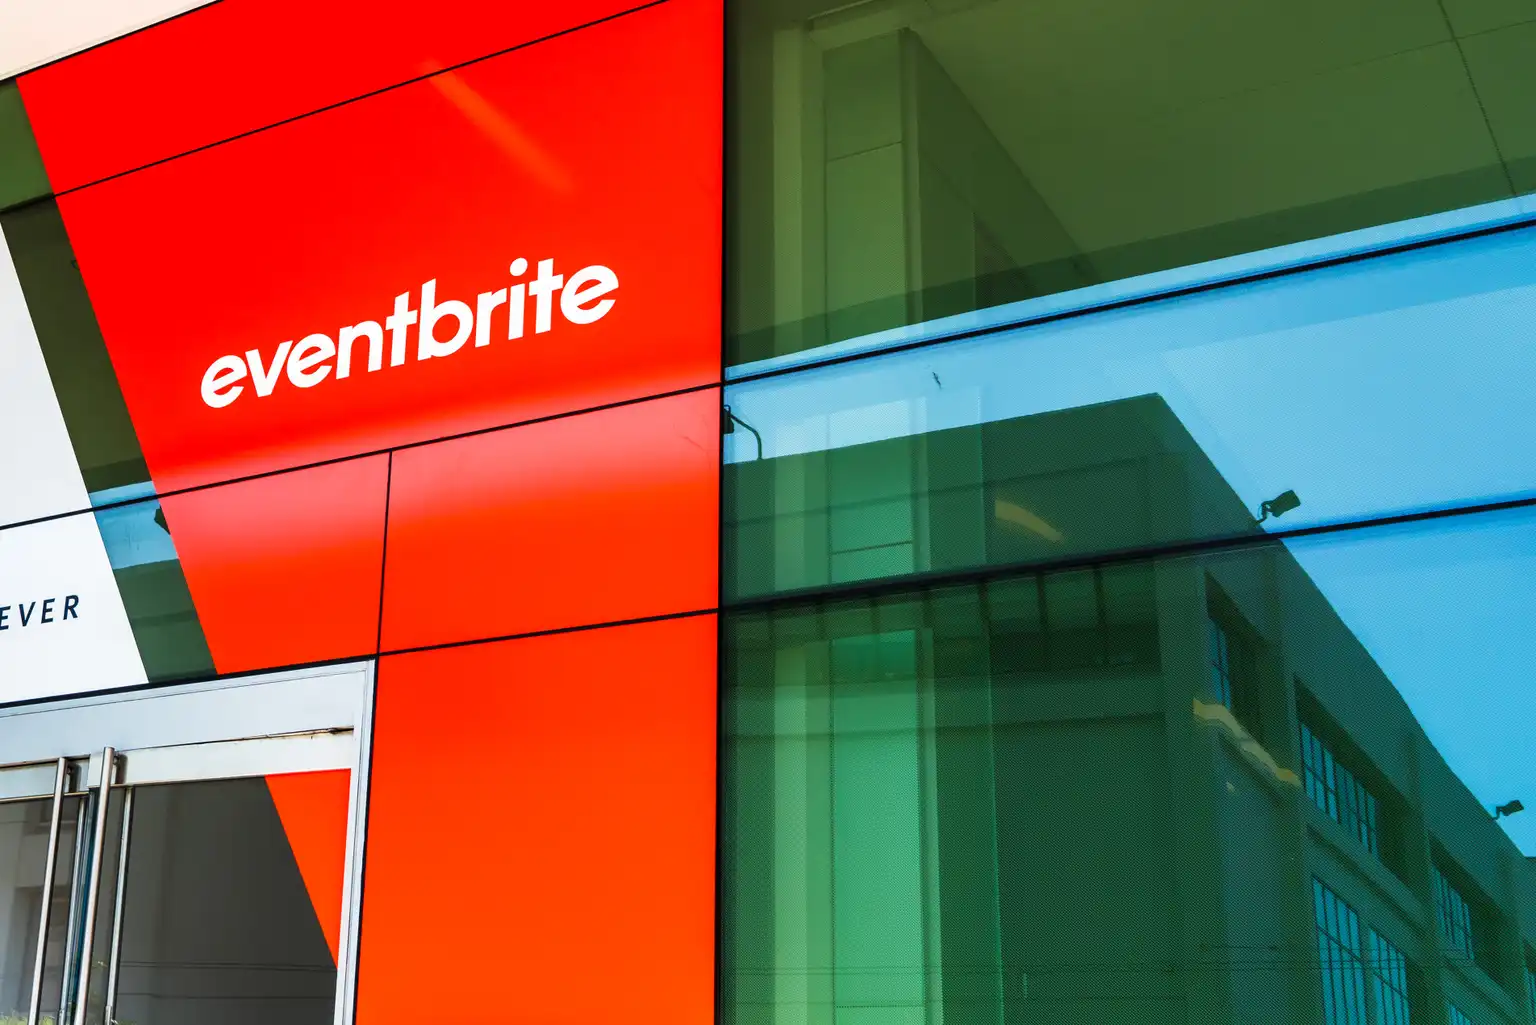 Eventbrite Stock: New Fees Could Spell Risk (Rating Downgrade) - Seeking Alpha